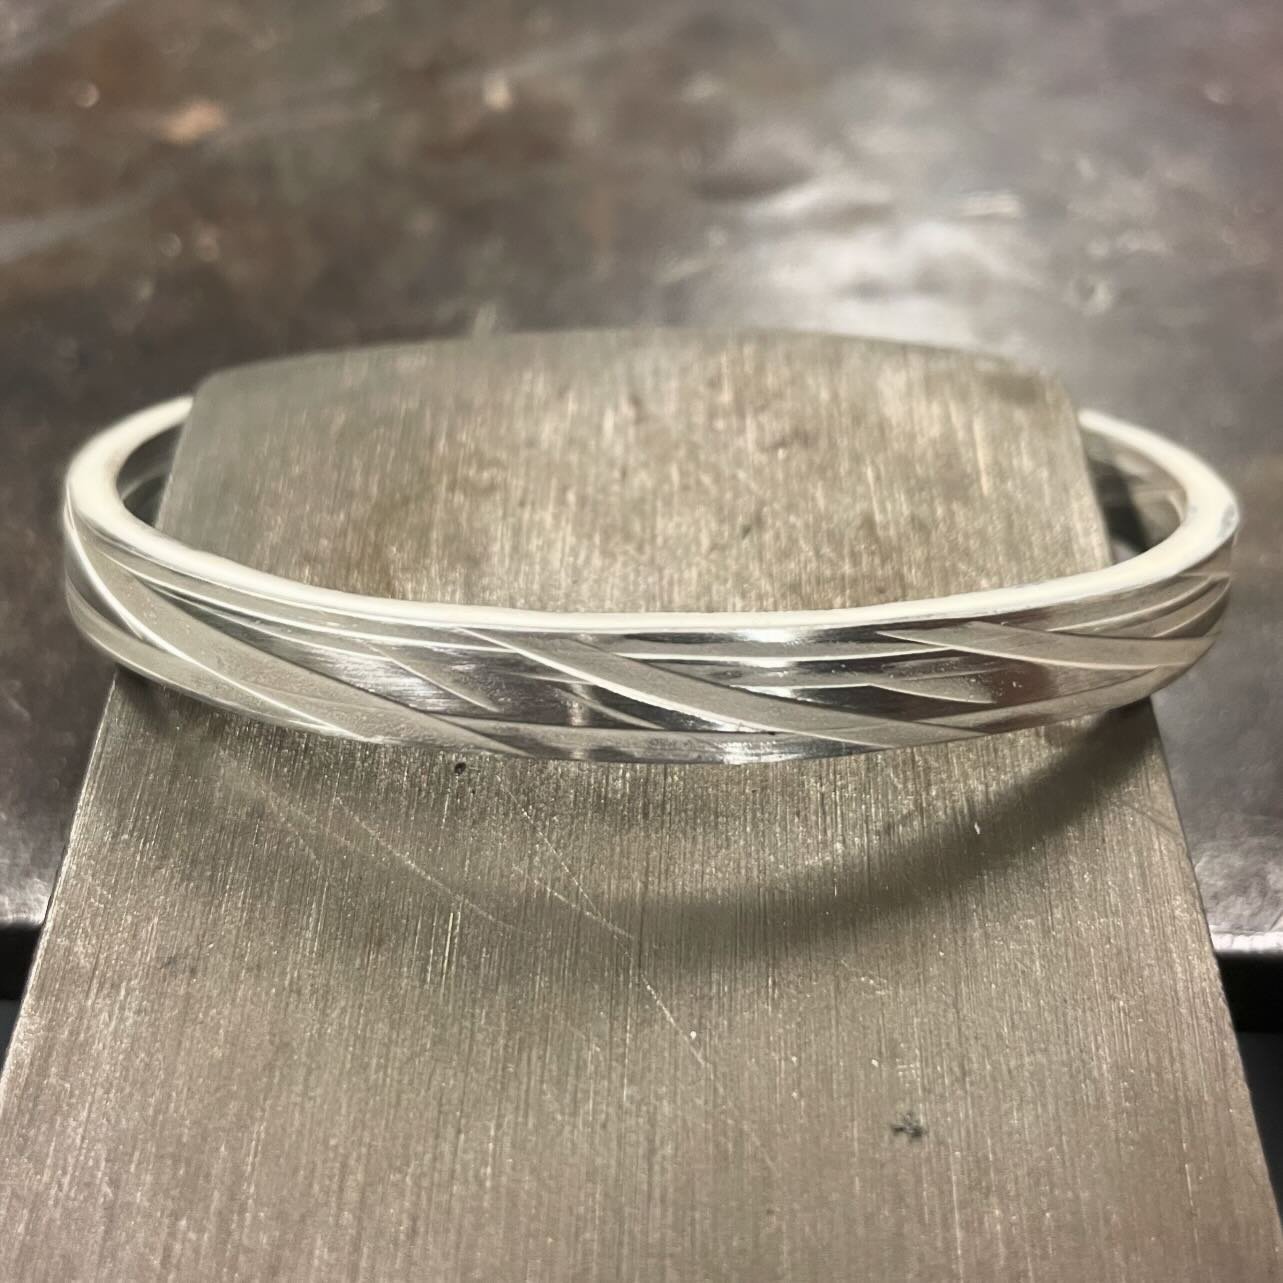 Bald designed silver cuff bracelet nearly finished. Might have to keep myself rather than sell this one!